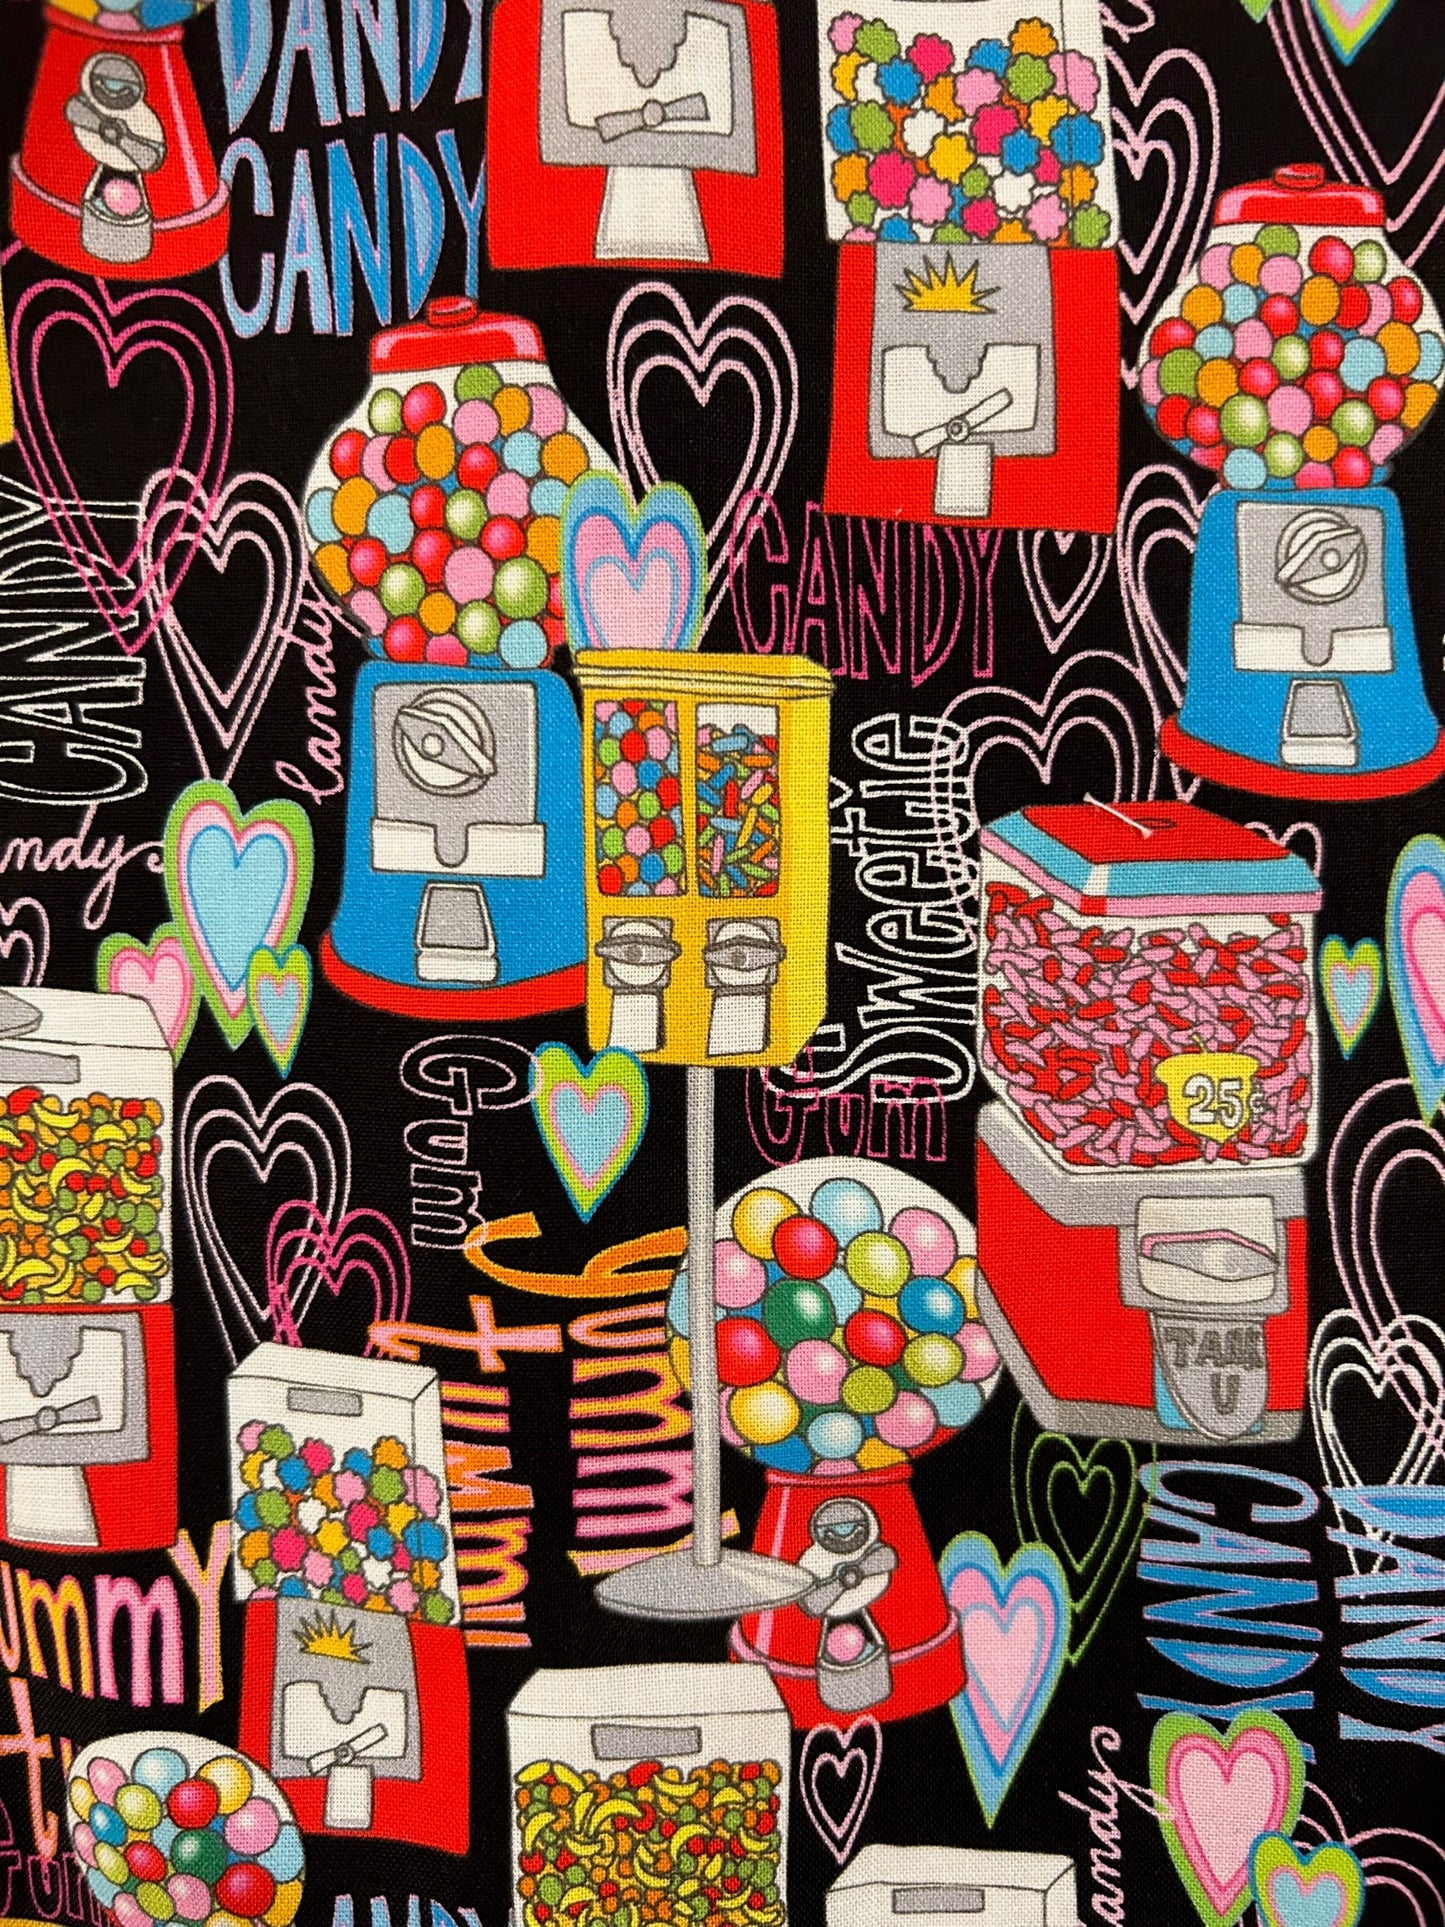 a close up of the fabric showing the gumball and candy machines on black background with hearts